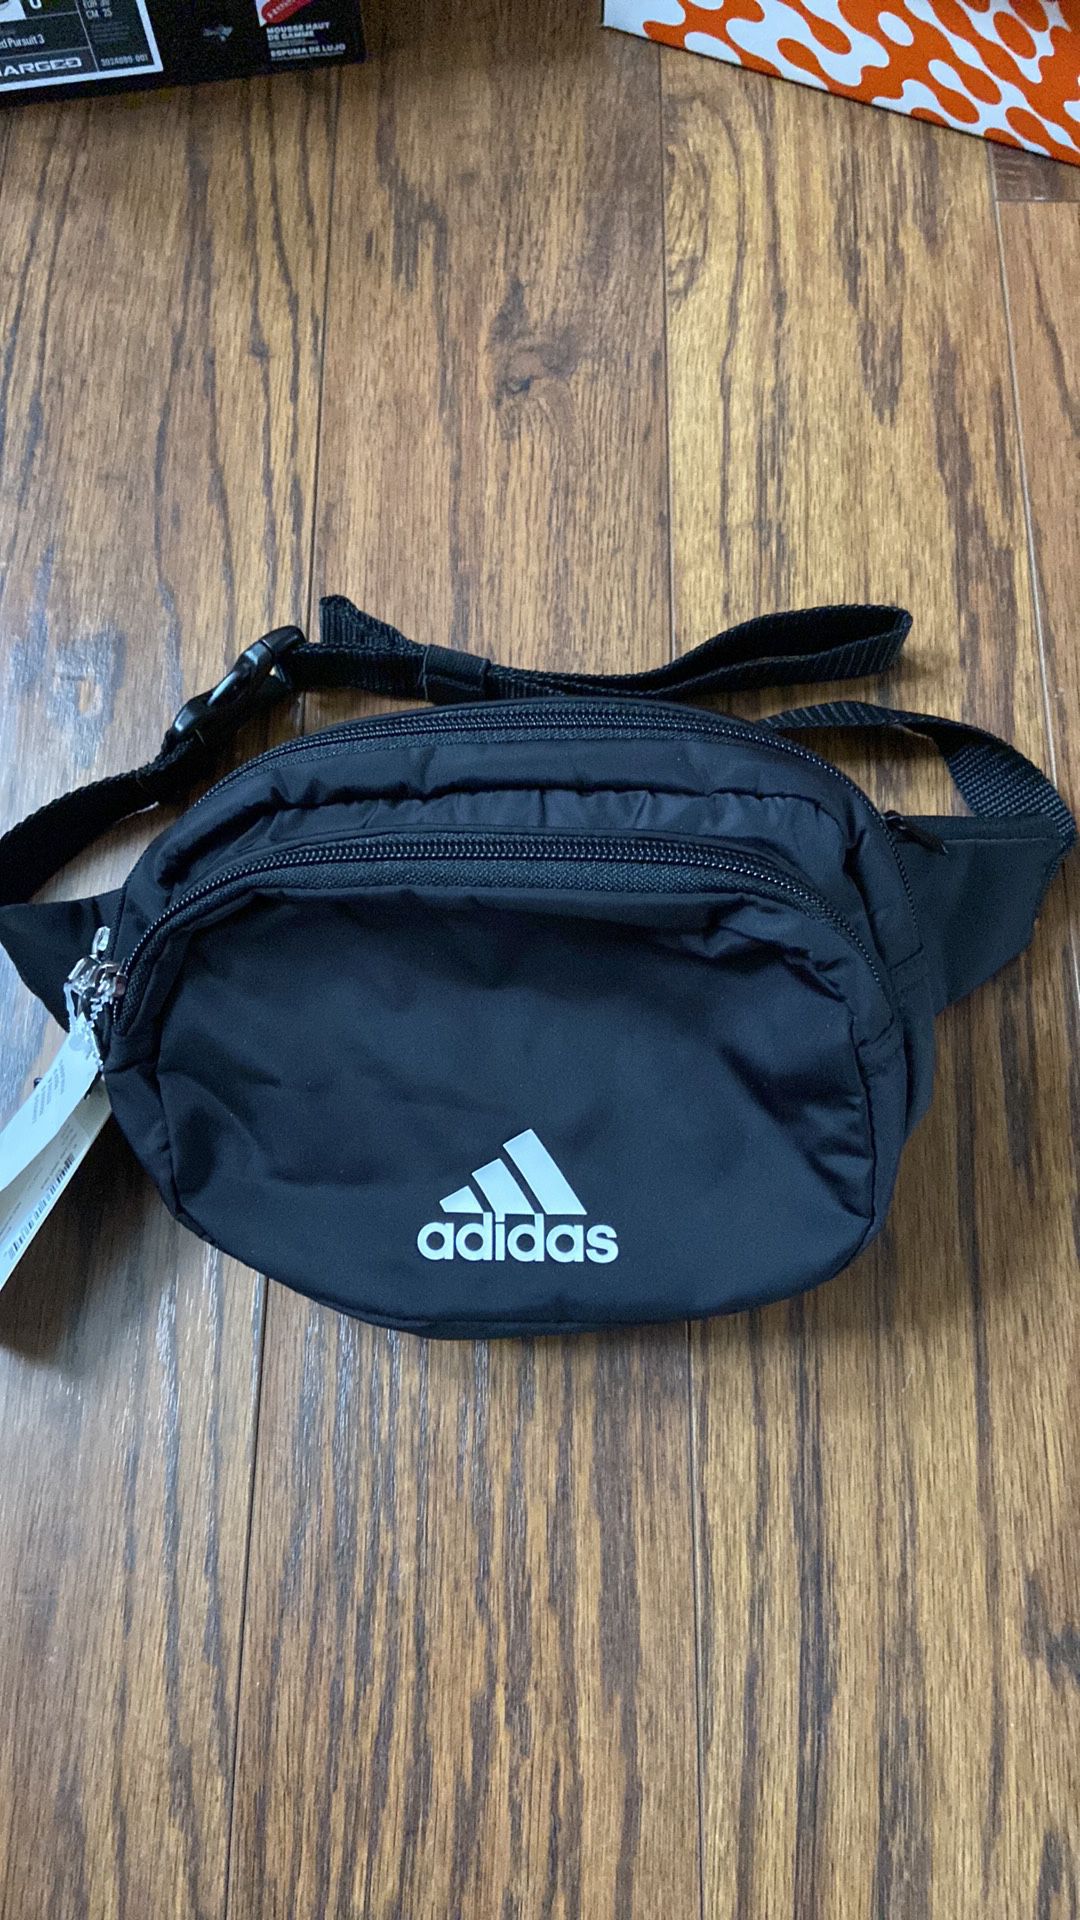 New Adidas Fanny Pack 